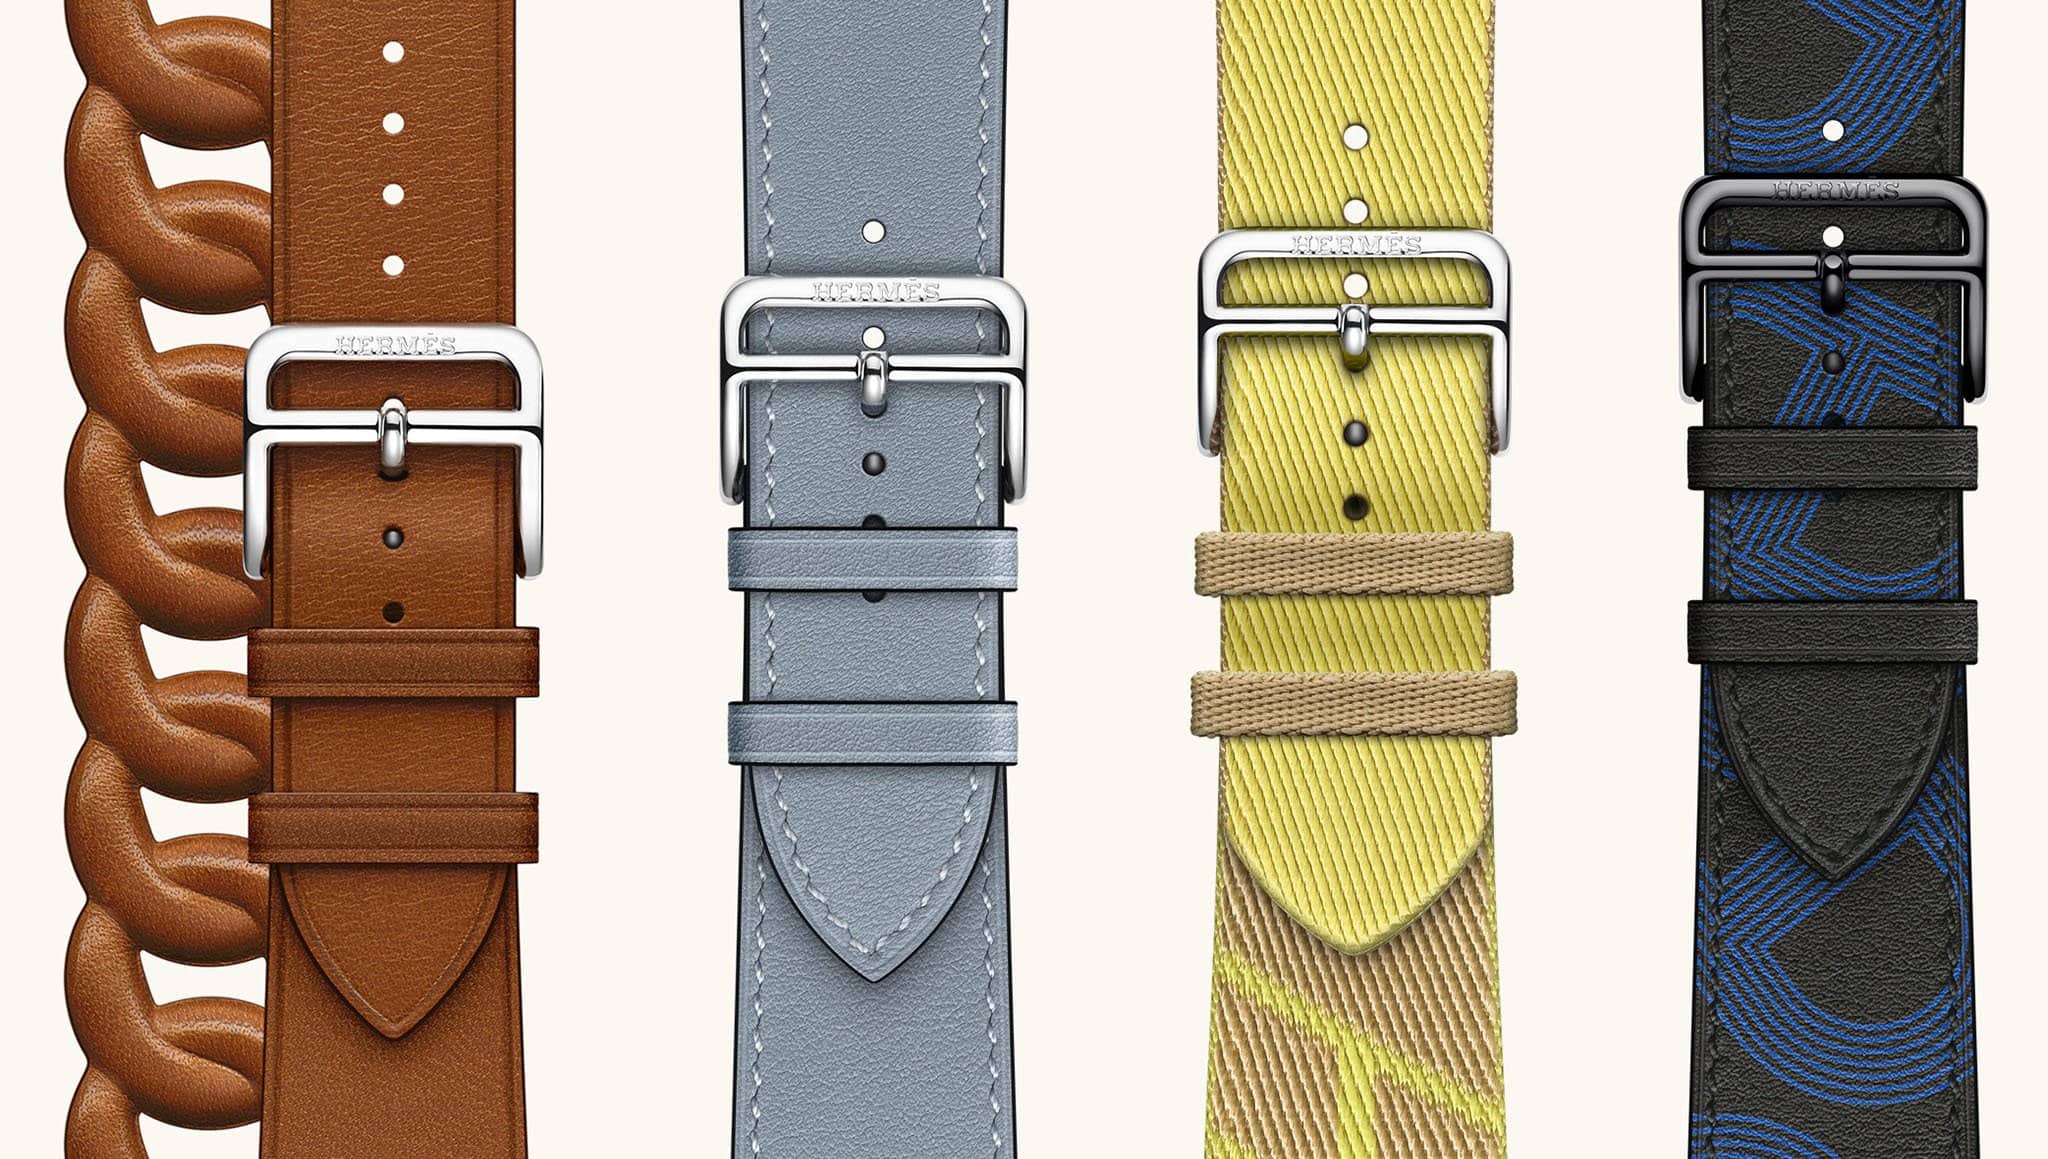 Elevate your Apple Watch further with Hermes watch straps, available in several styles and designs